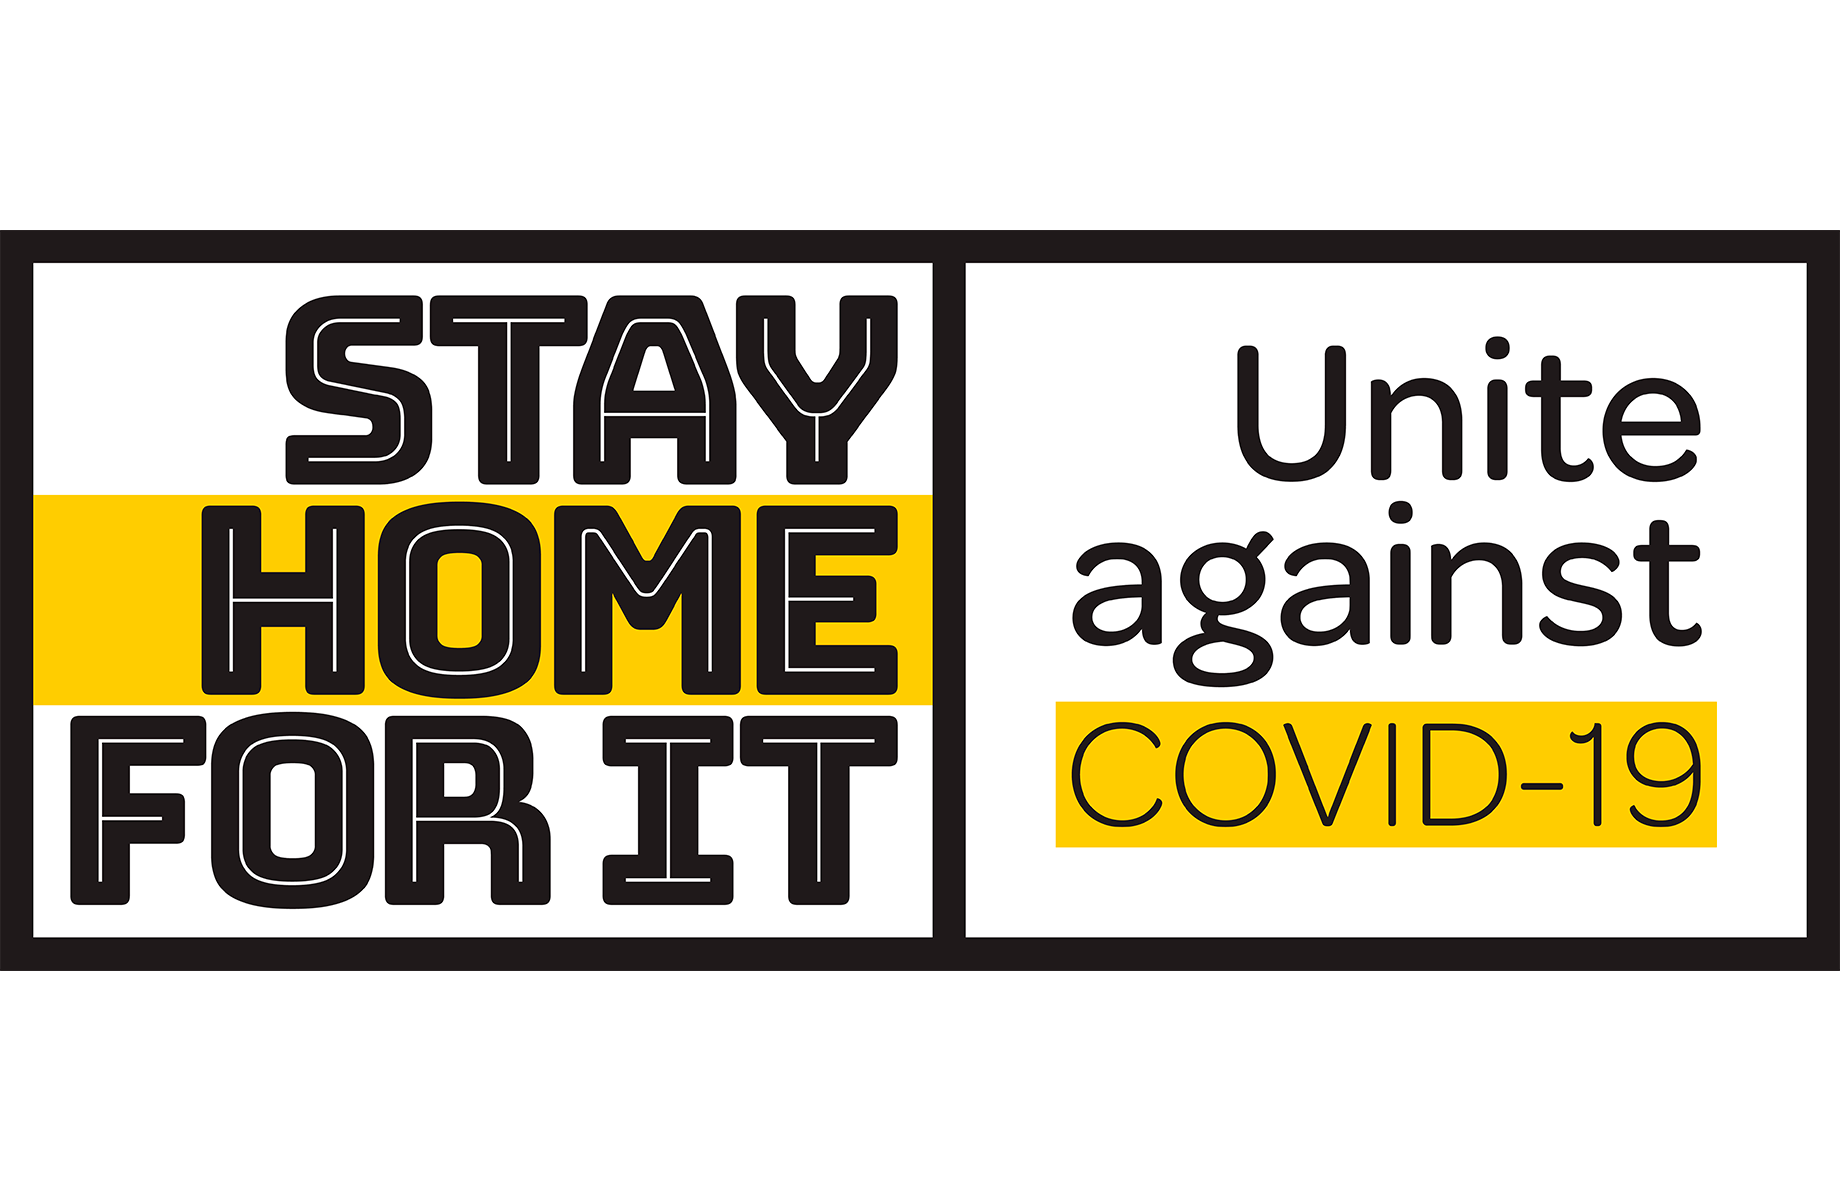 #STAYHOMEFORIT Releases Call-Out to Tease What Awaits on the Other side of Covid-19